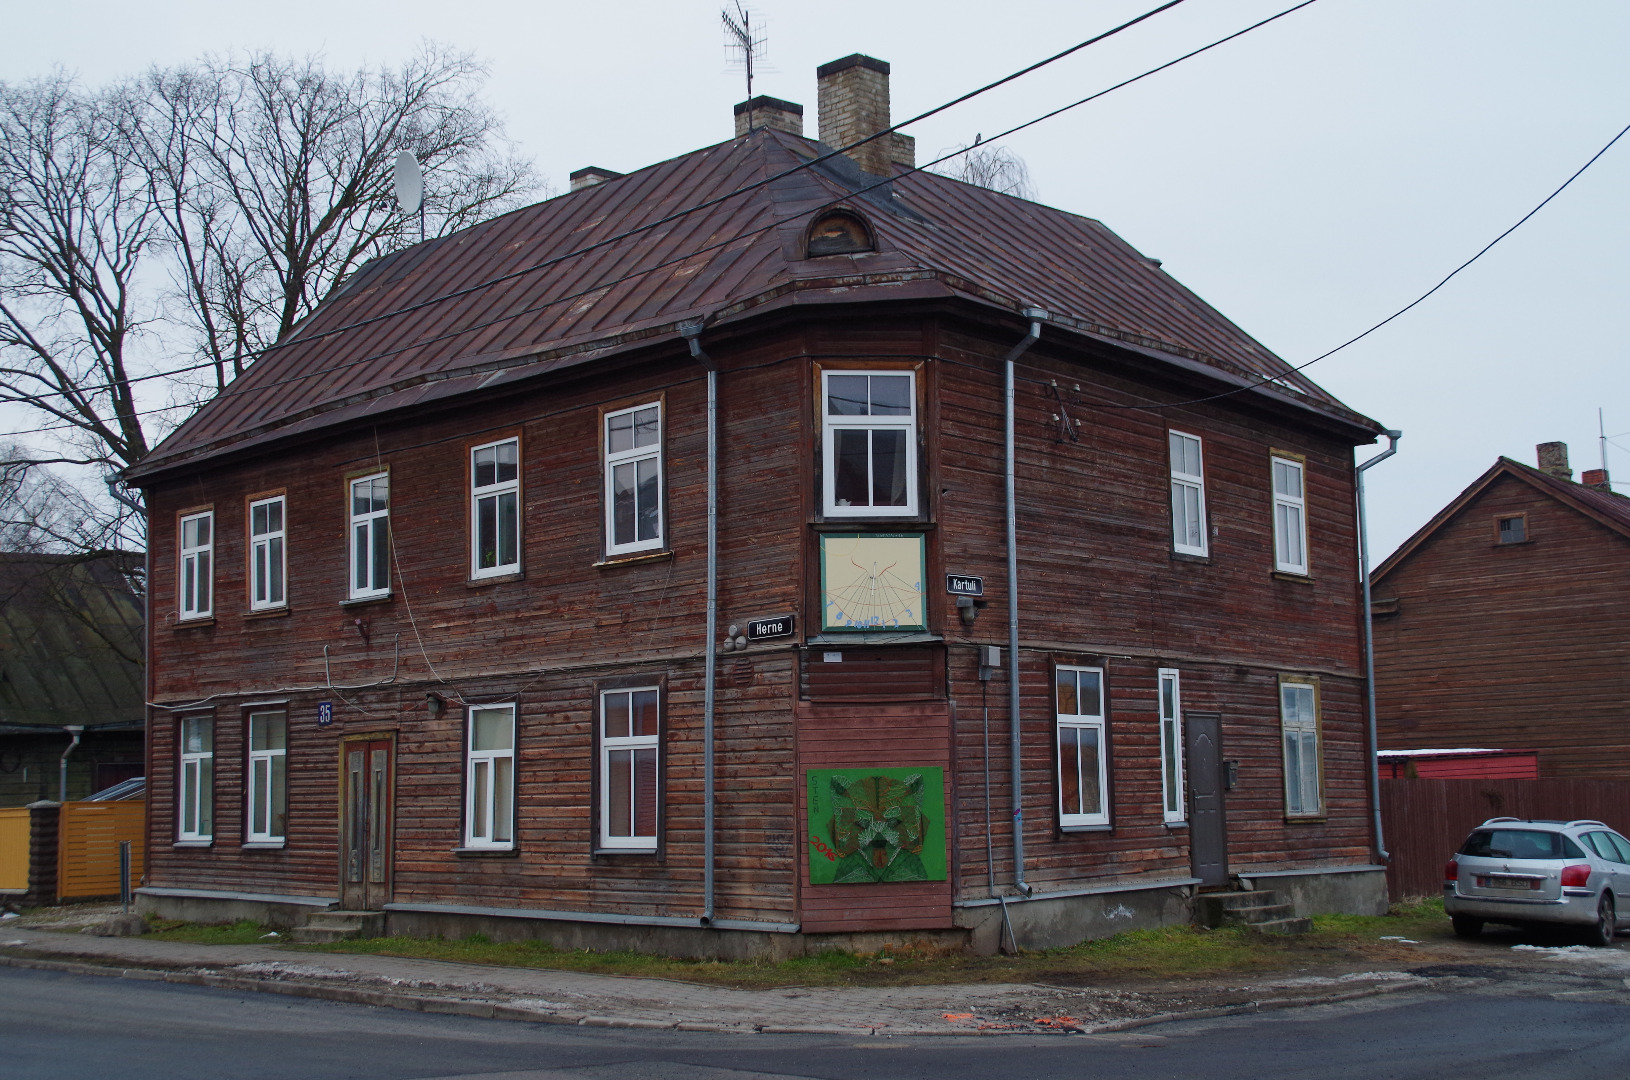 Tartu, Herne 35. The house is located at the crossing point of Herne and Kartuli Street. The house has a food store. rephoto